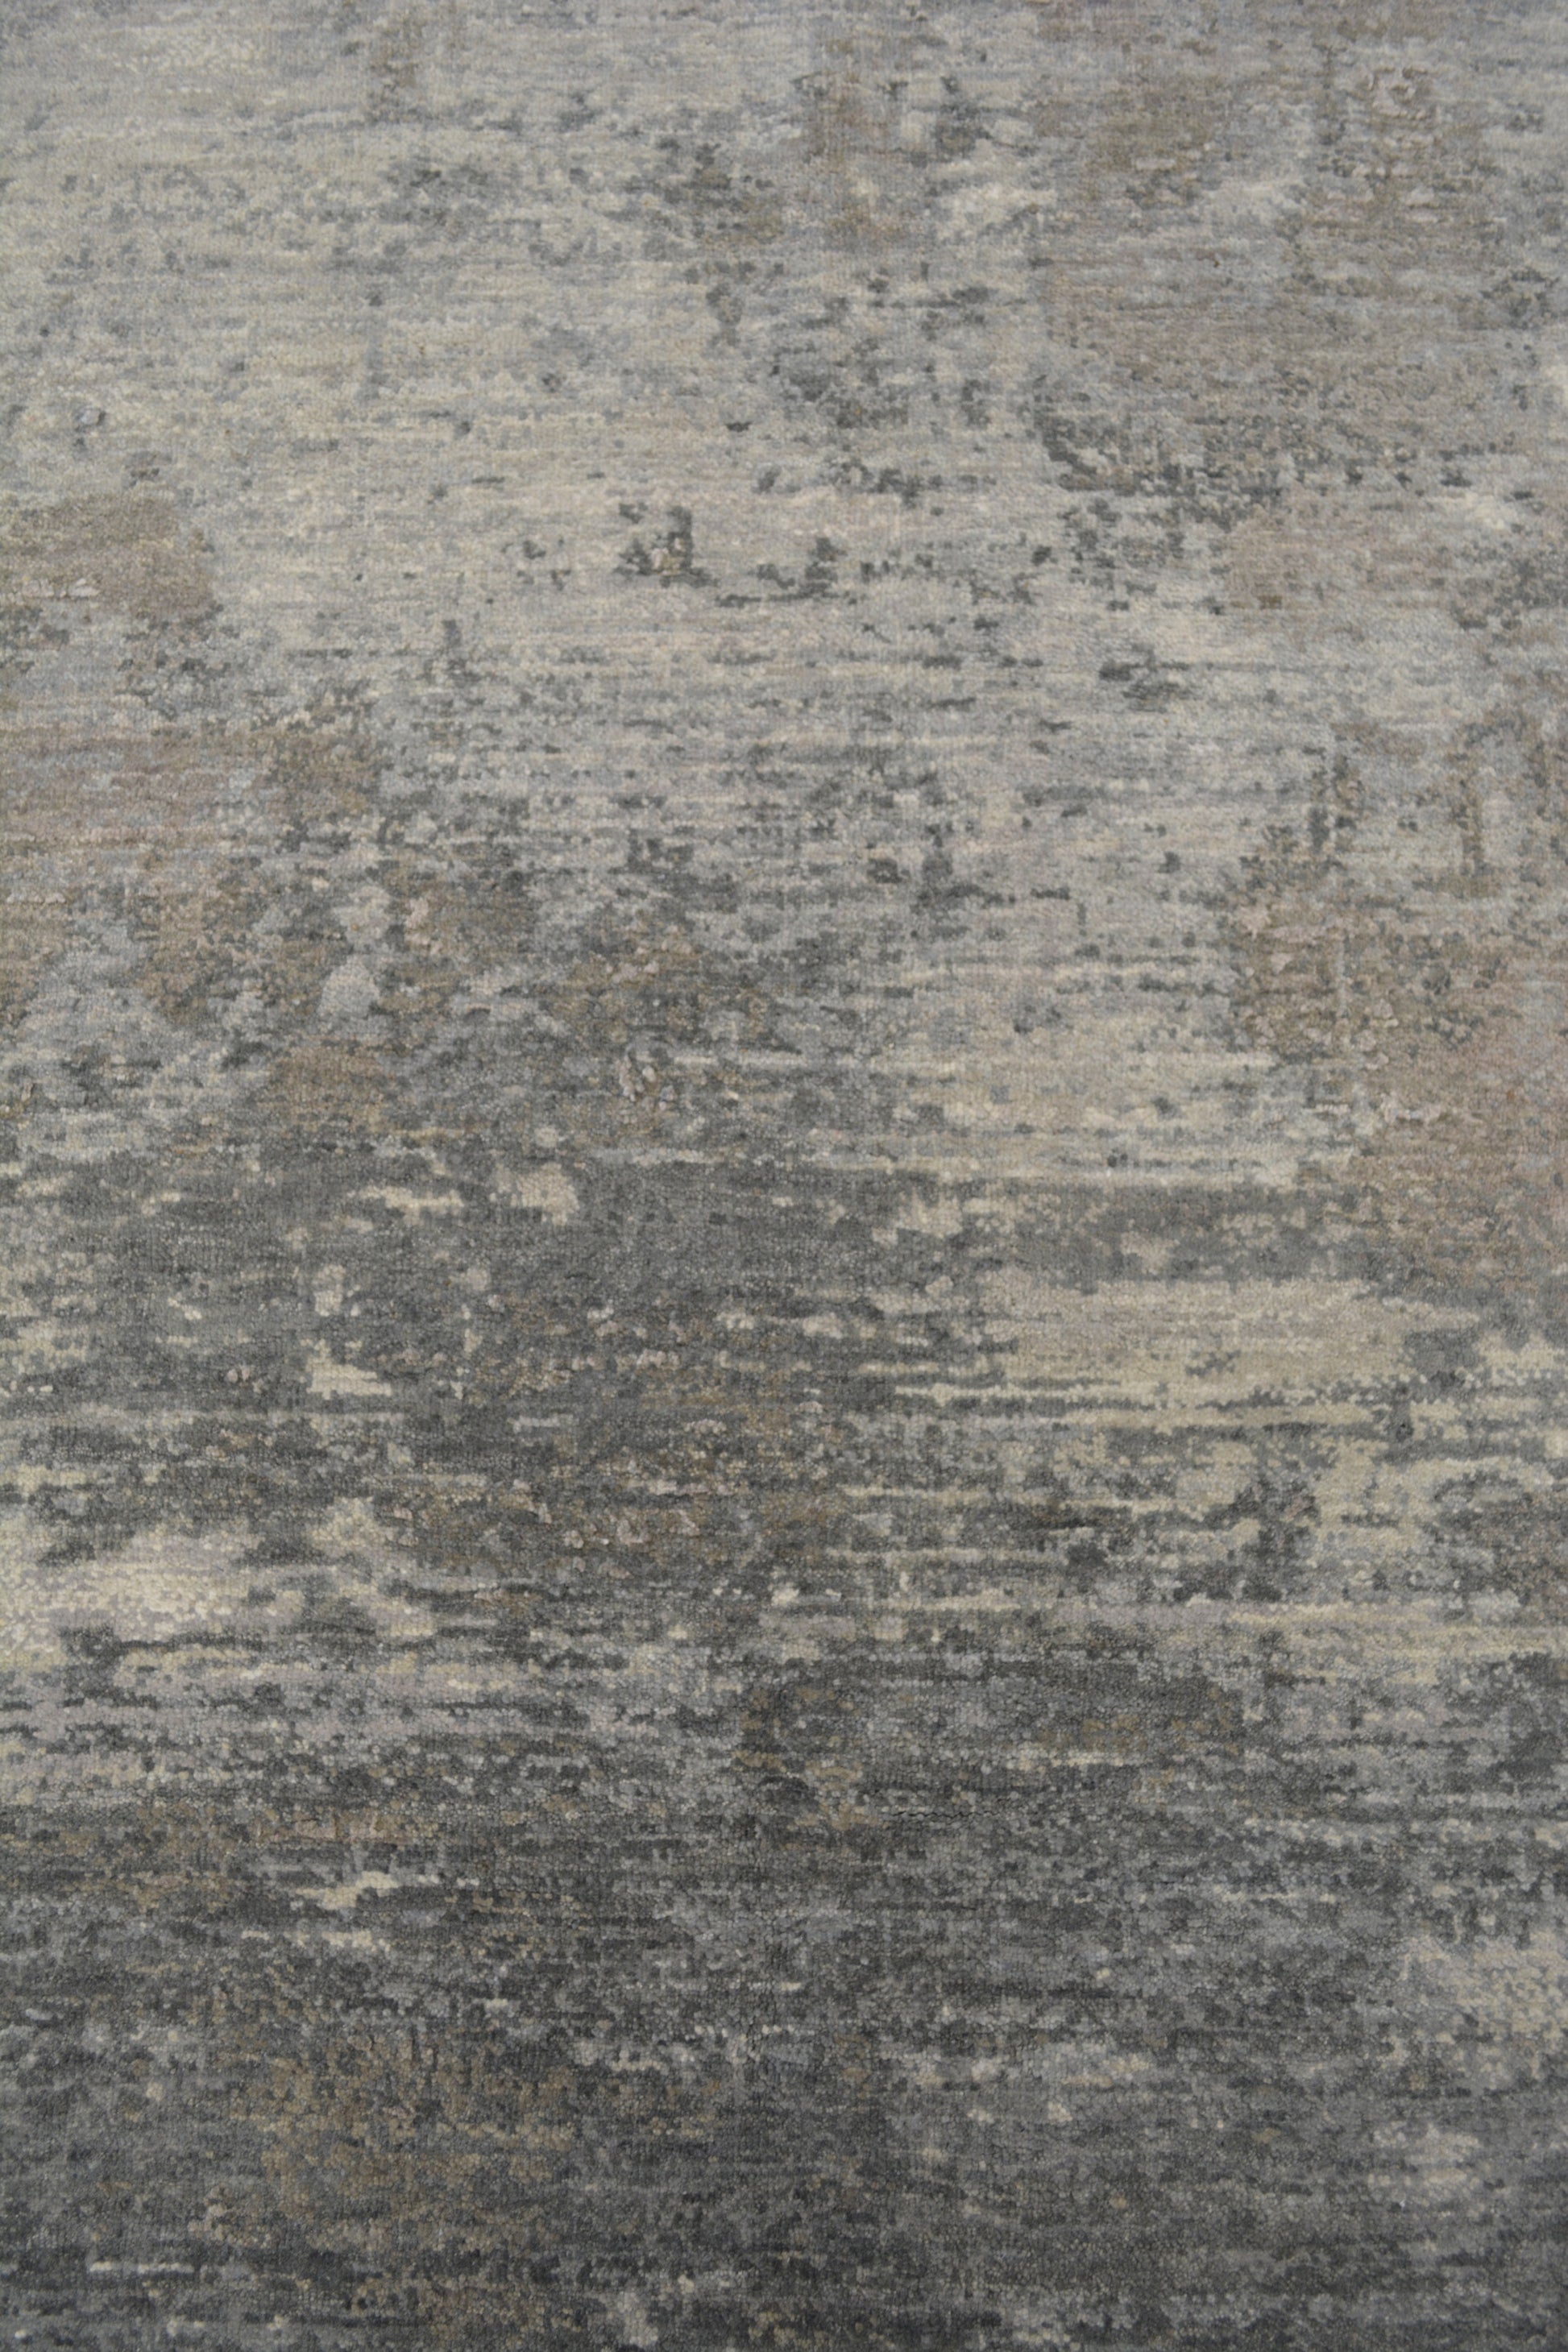 The center of the rug renders random tones within dark gray, white, and cream.